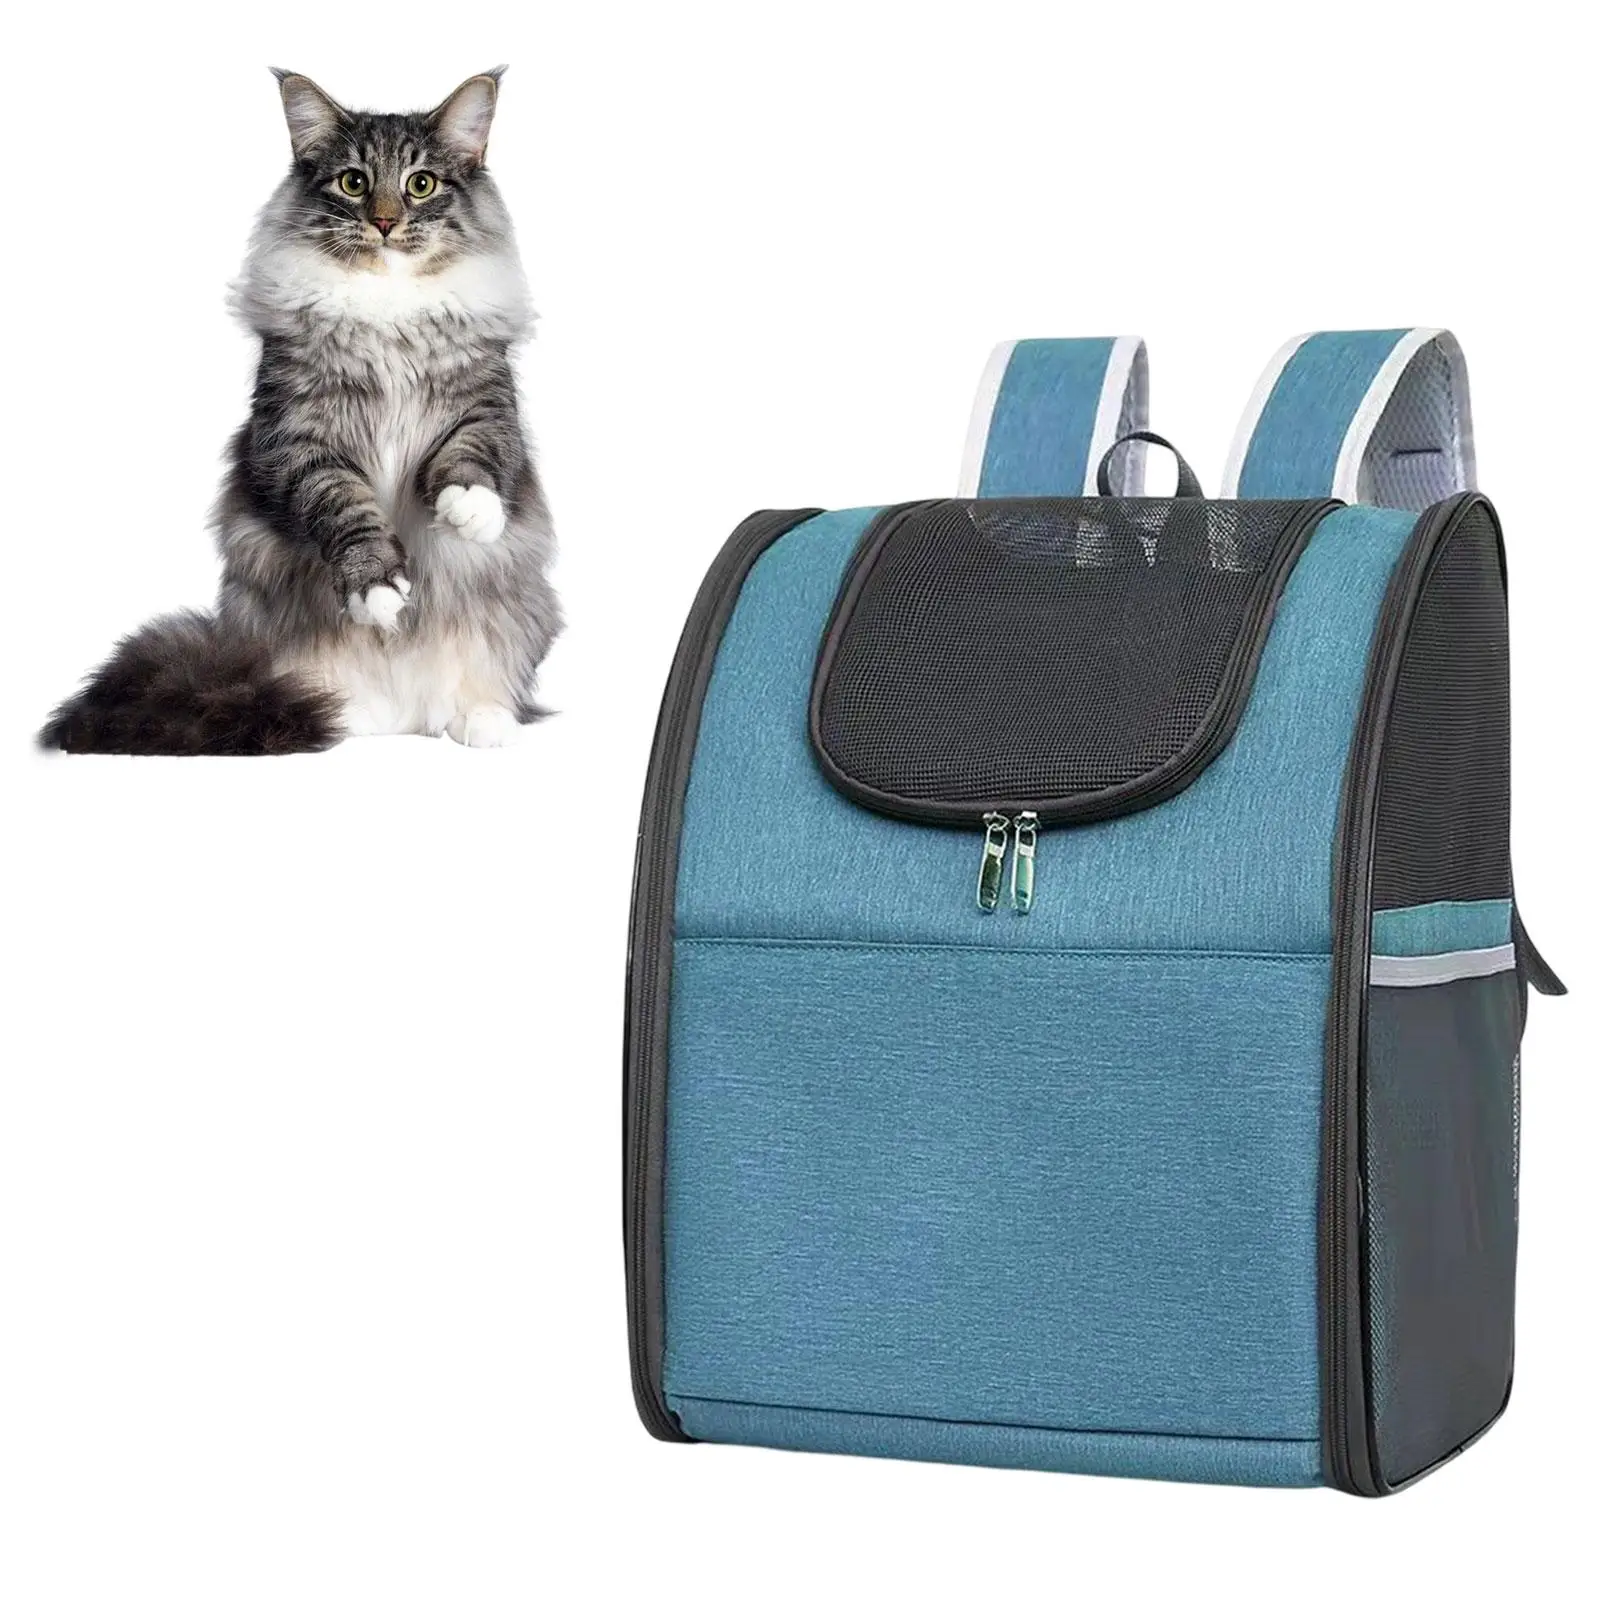 Ventilate Travel Bag for Small Dogs Cats Cat Carrier Backpacks Breathable Pet Carrier Backpack for Rabbits Kittens Puppy Camping